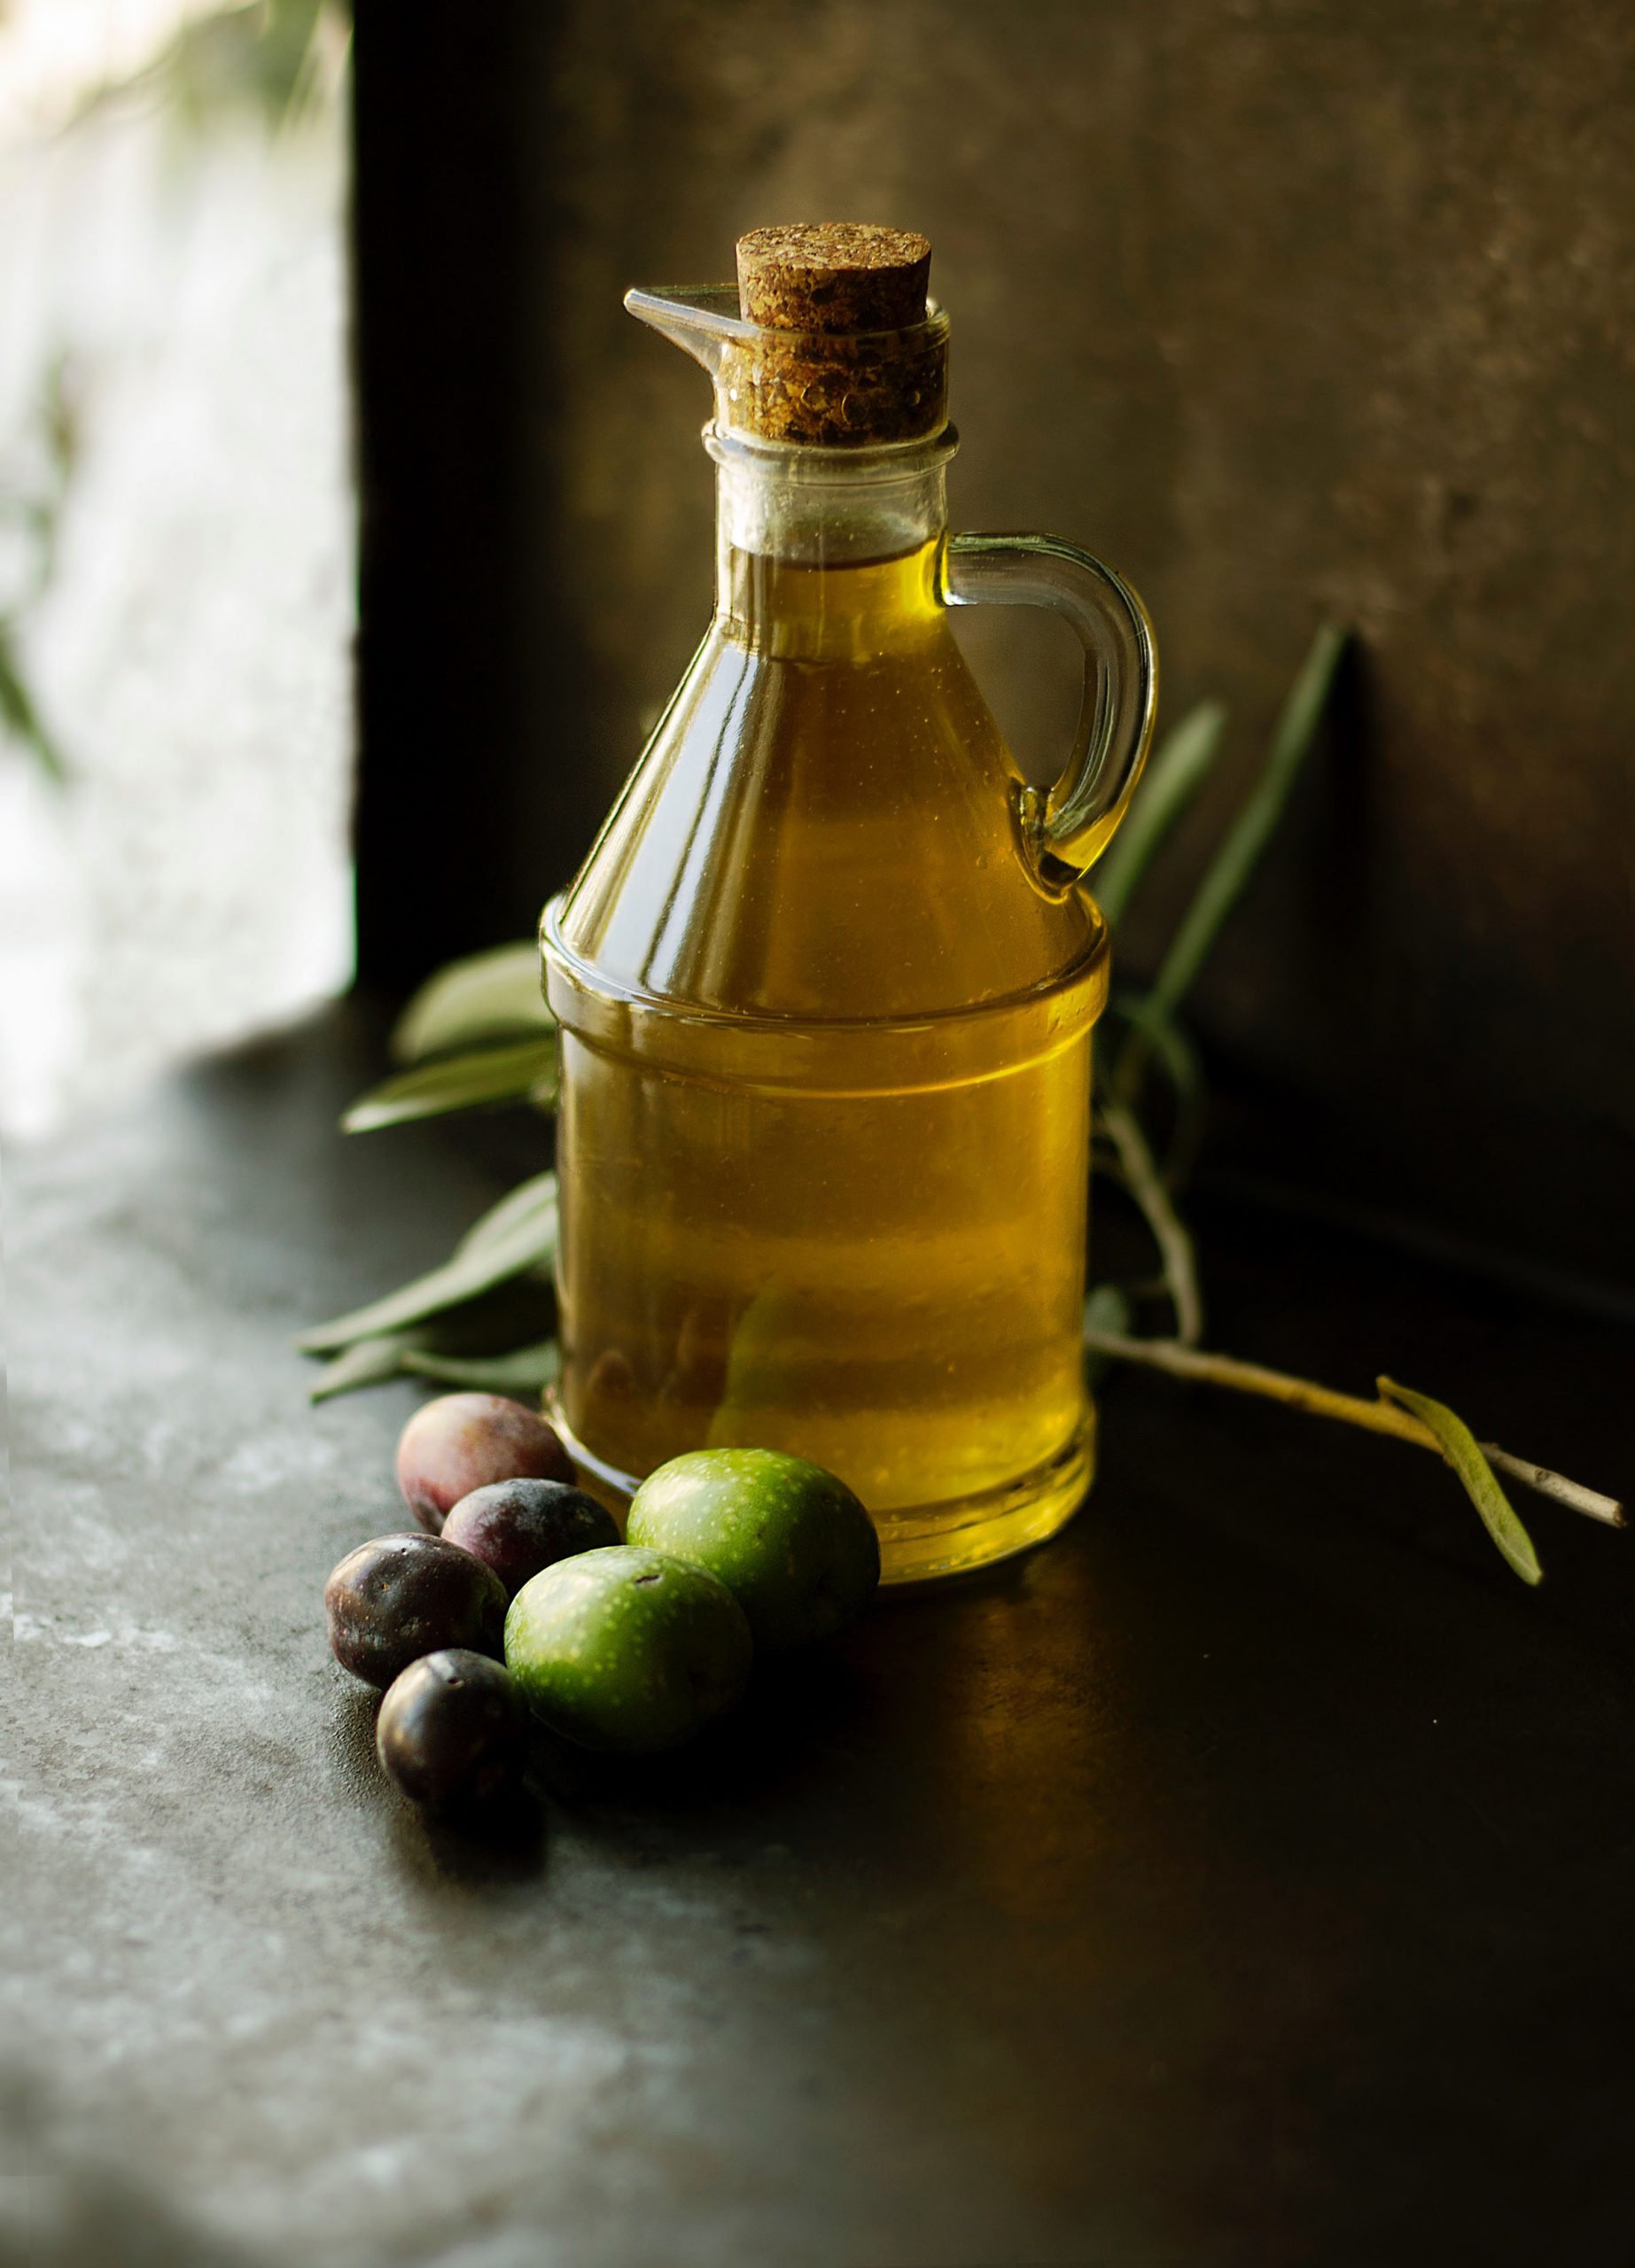 Bottle of olive oil and olives on a table